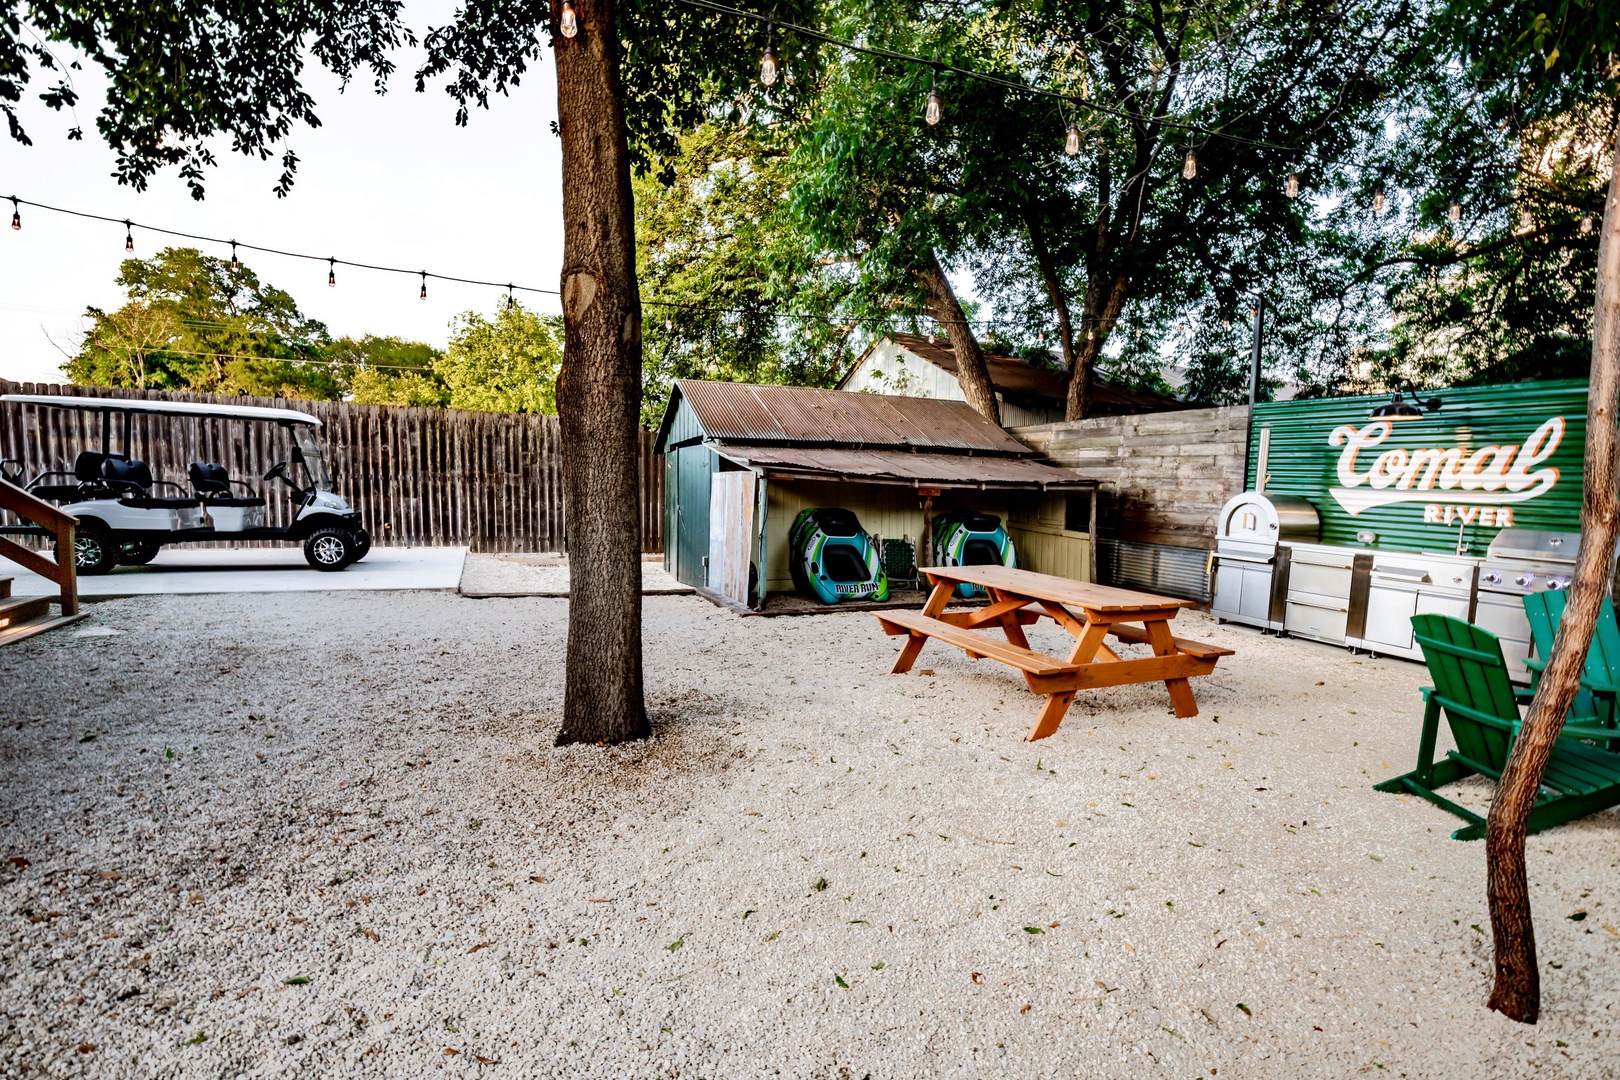 The back yard picnic area boasts a firepit, grill, pizza oven, & outdoor fridge